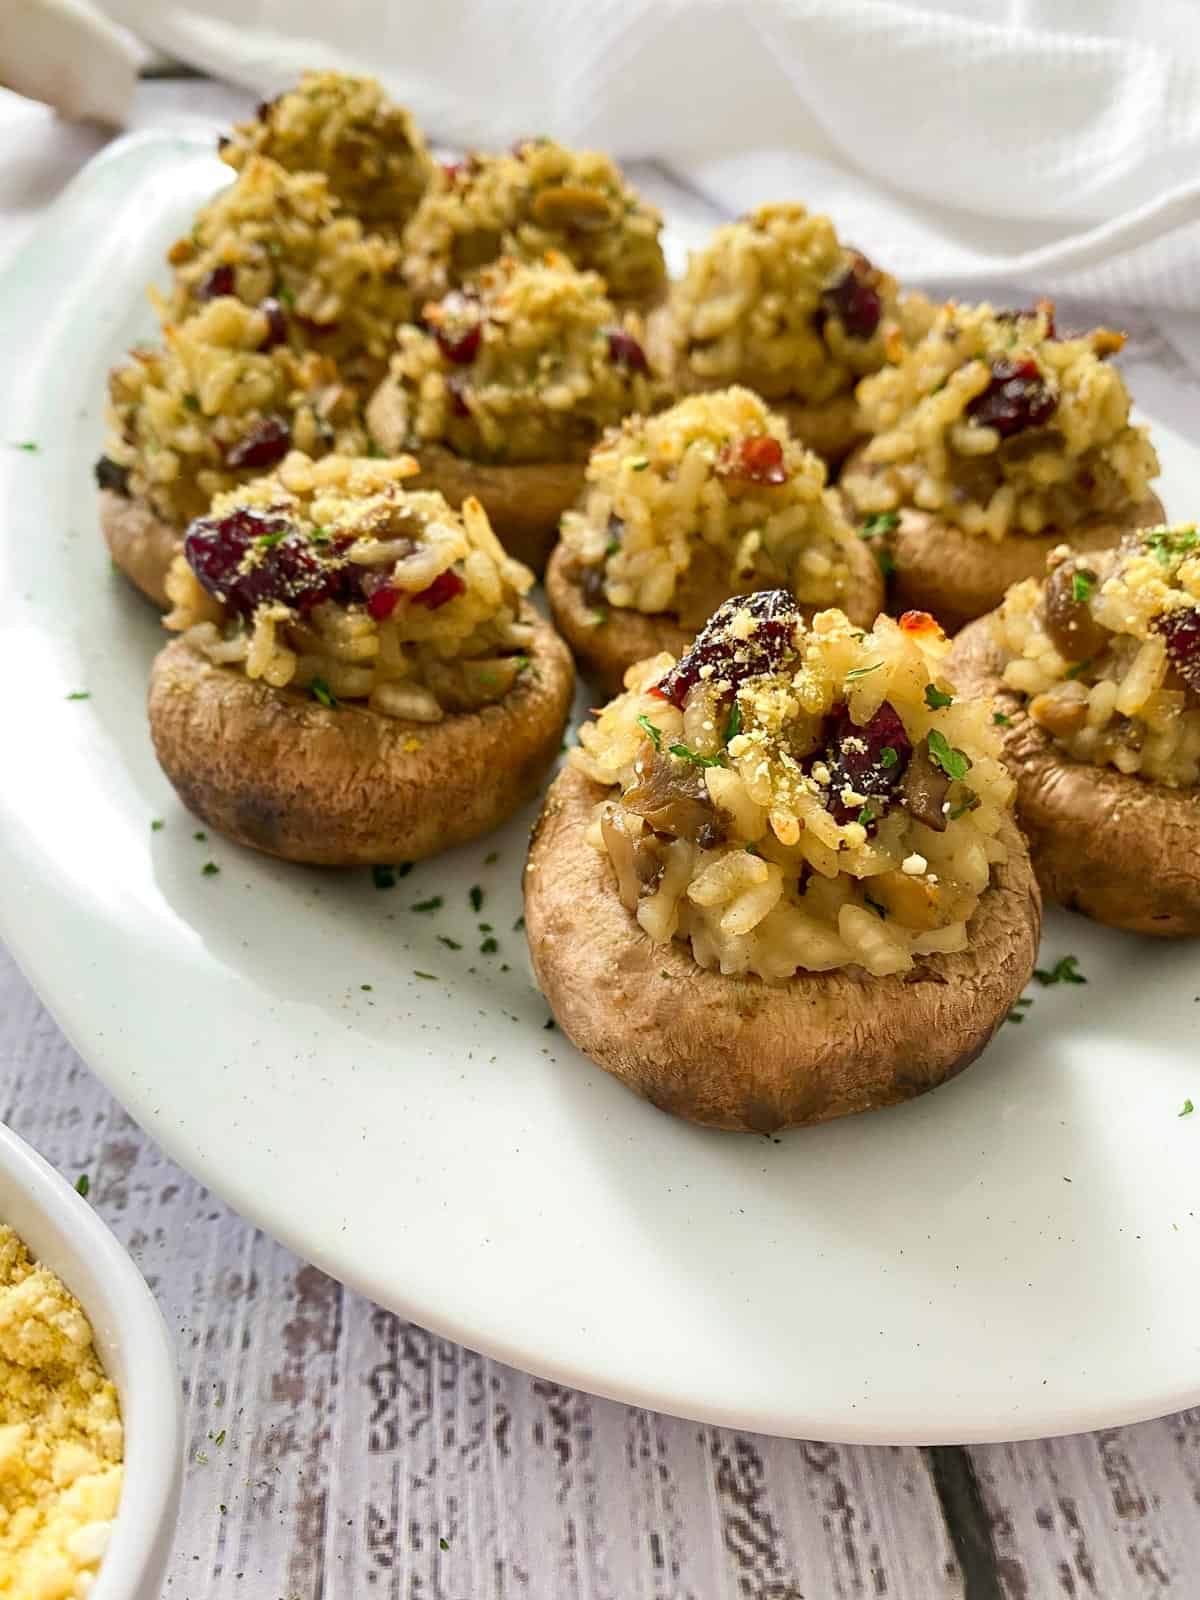 Stuffed mushrooms with rice and cranberries on white plater.